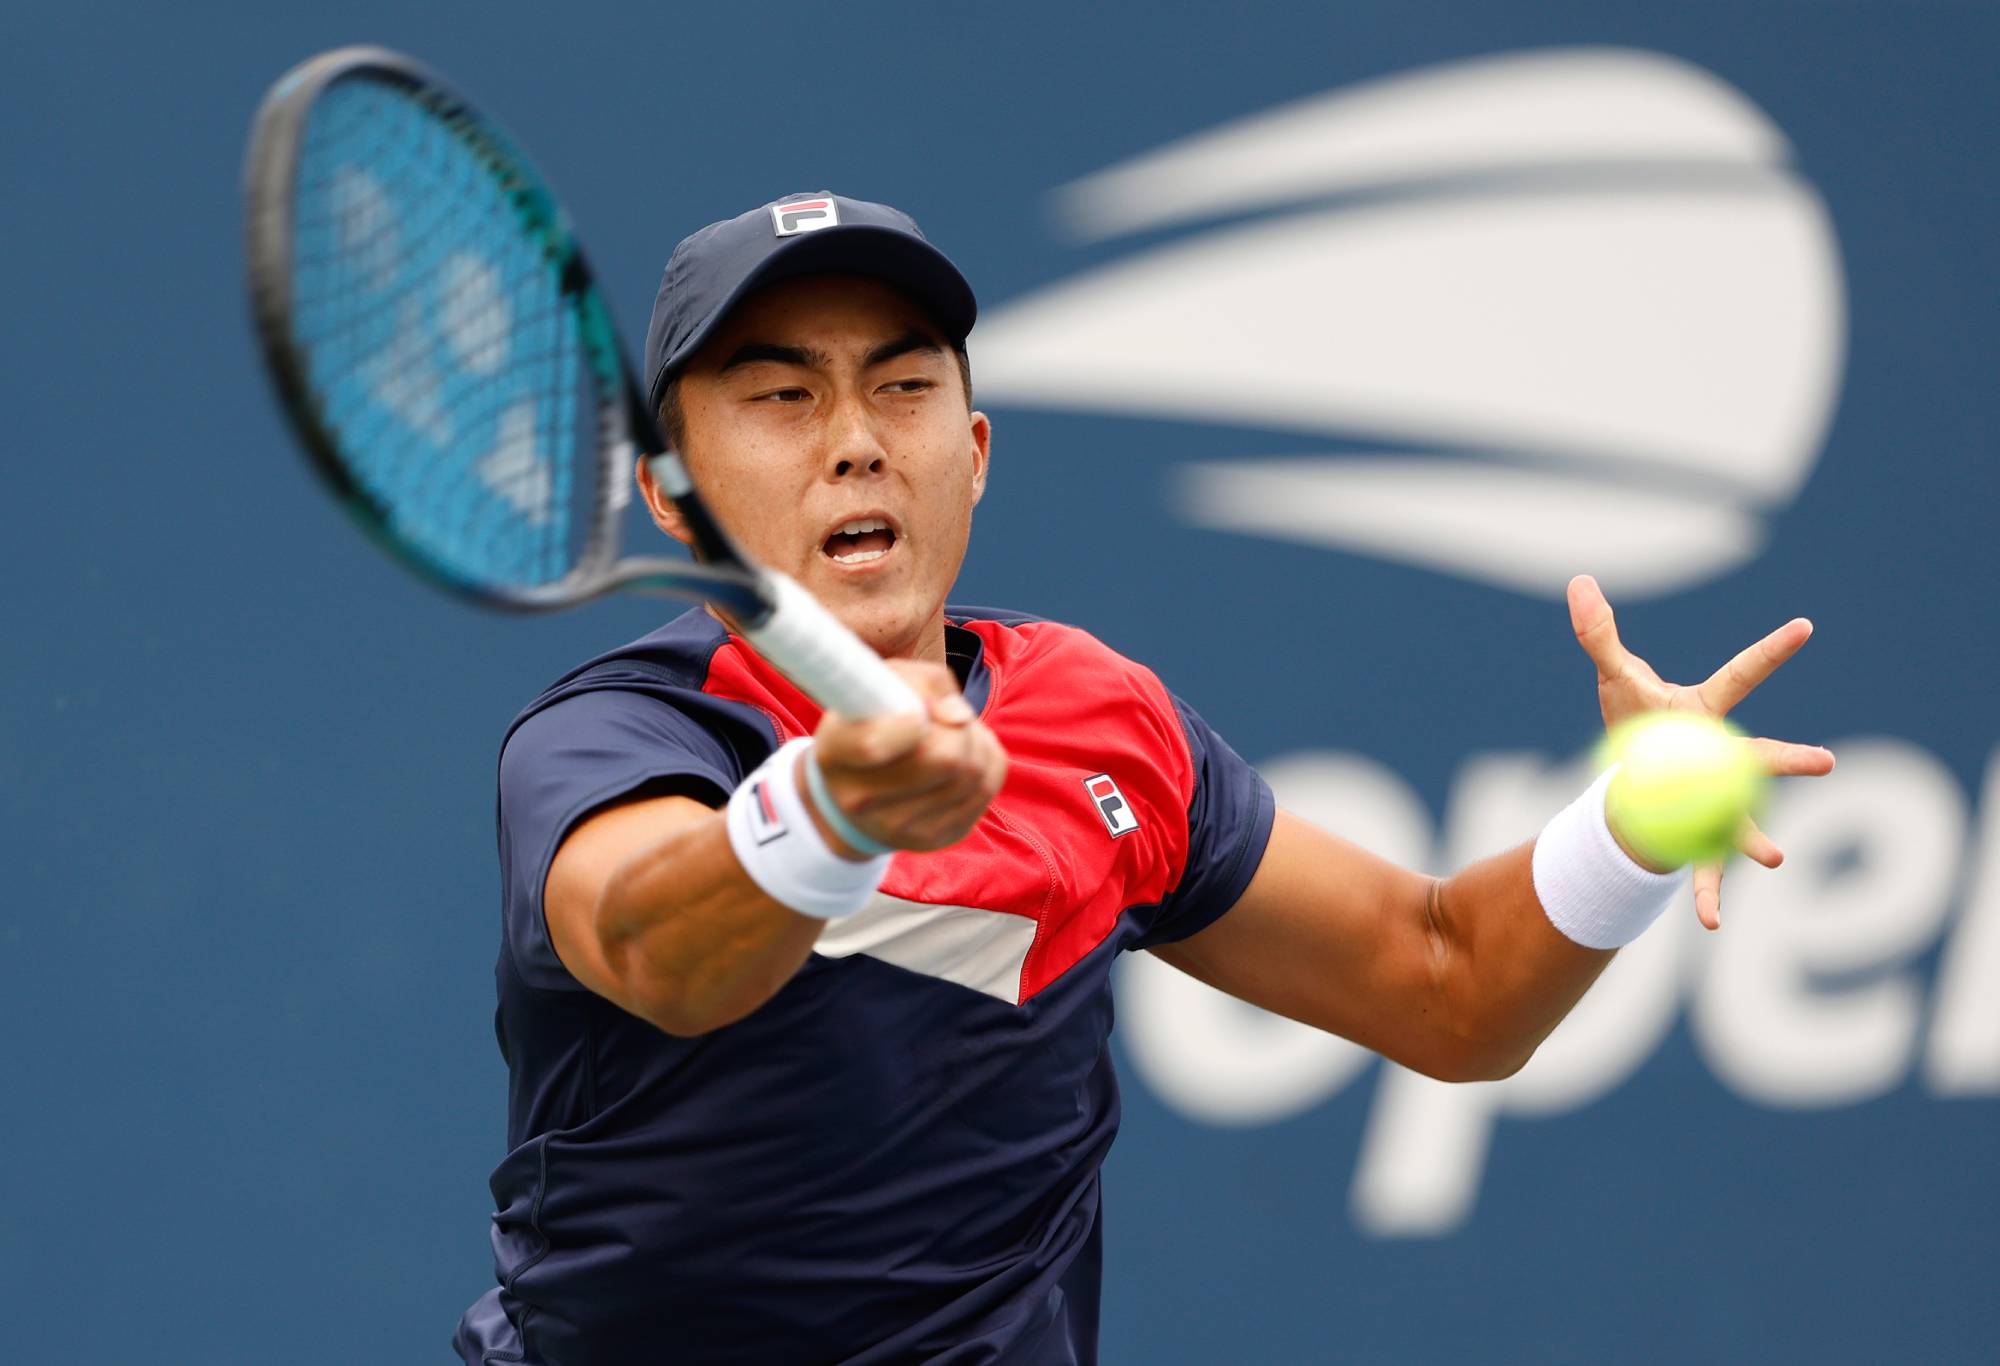 NEW YORK, NEW YORK - AUGUST 28: Rinky Hijikata of Australia returns a shot against Pavel Kotov during their Men's Singles First Round match on Day One of the 2023 US Open at the USTA Billie Jean King National Tennis Center on August 28, 2023 in the Flushing neighborhood of the Queens borough of New York City. (Photo by Sarah Stier/Getty Images)